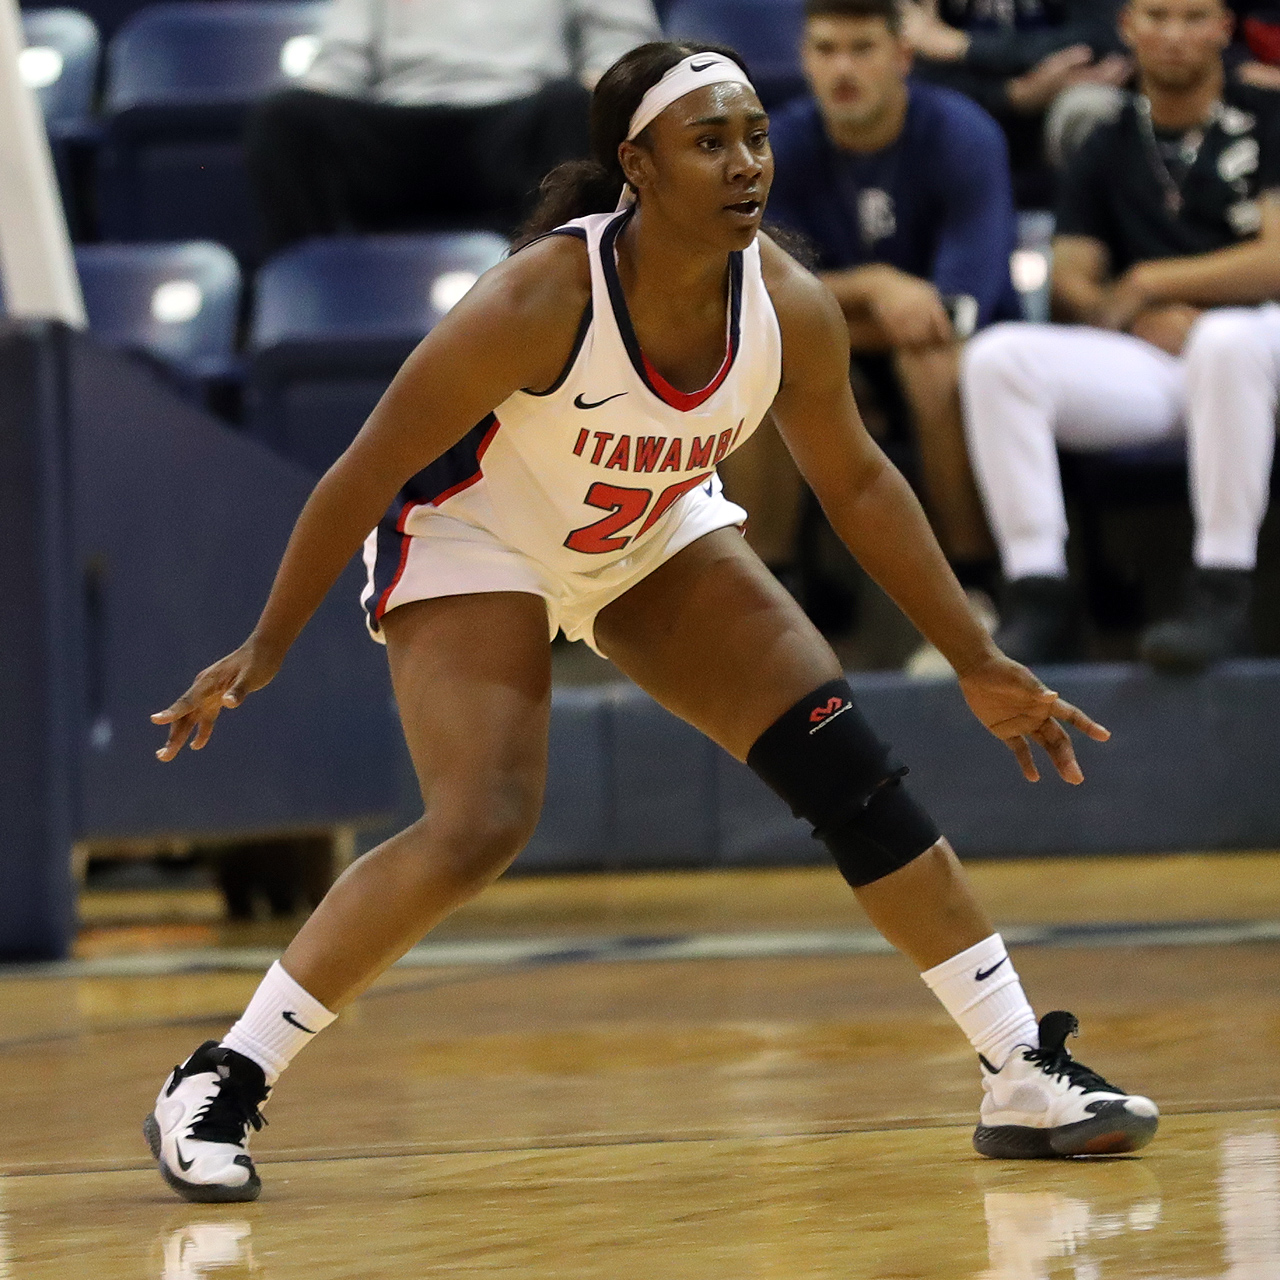 Lady Indians overcome slow start to win big over ASU Mid-South